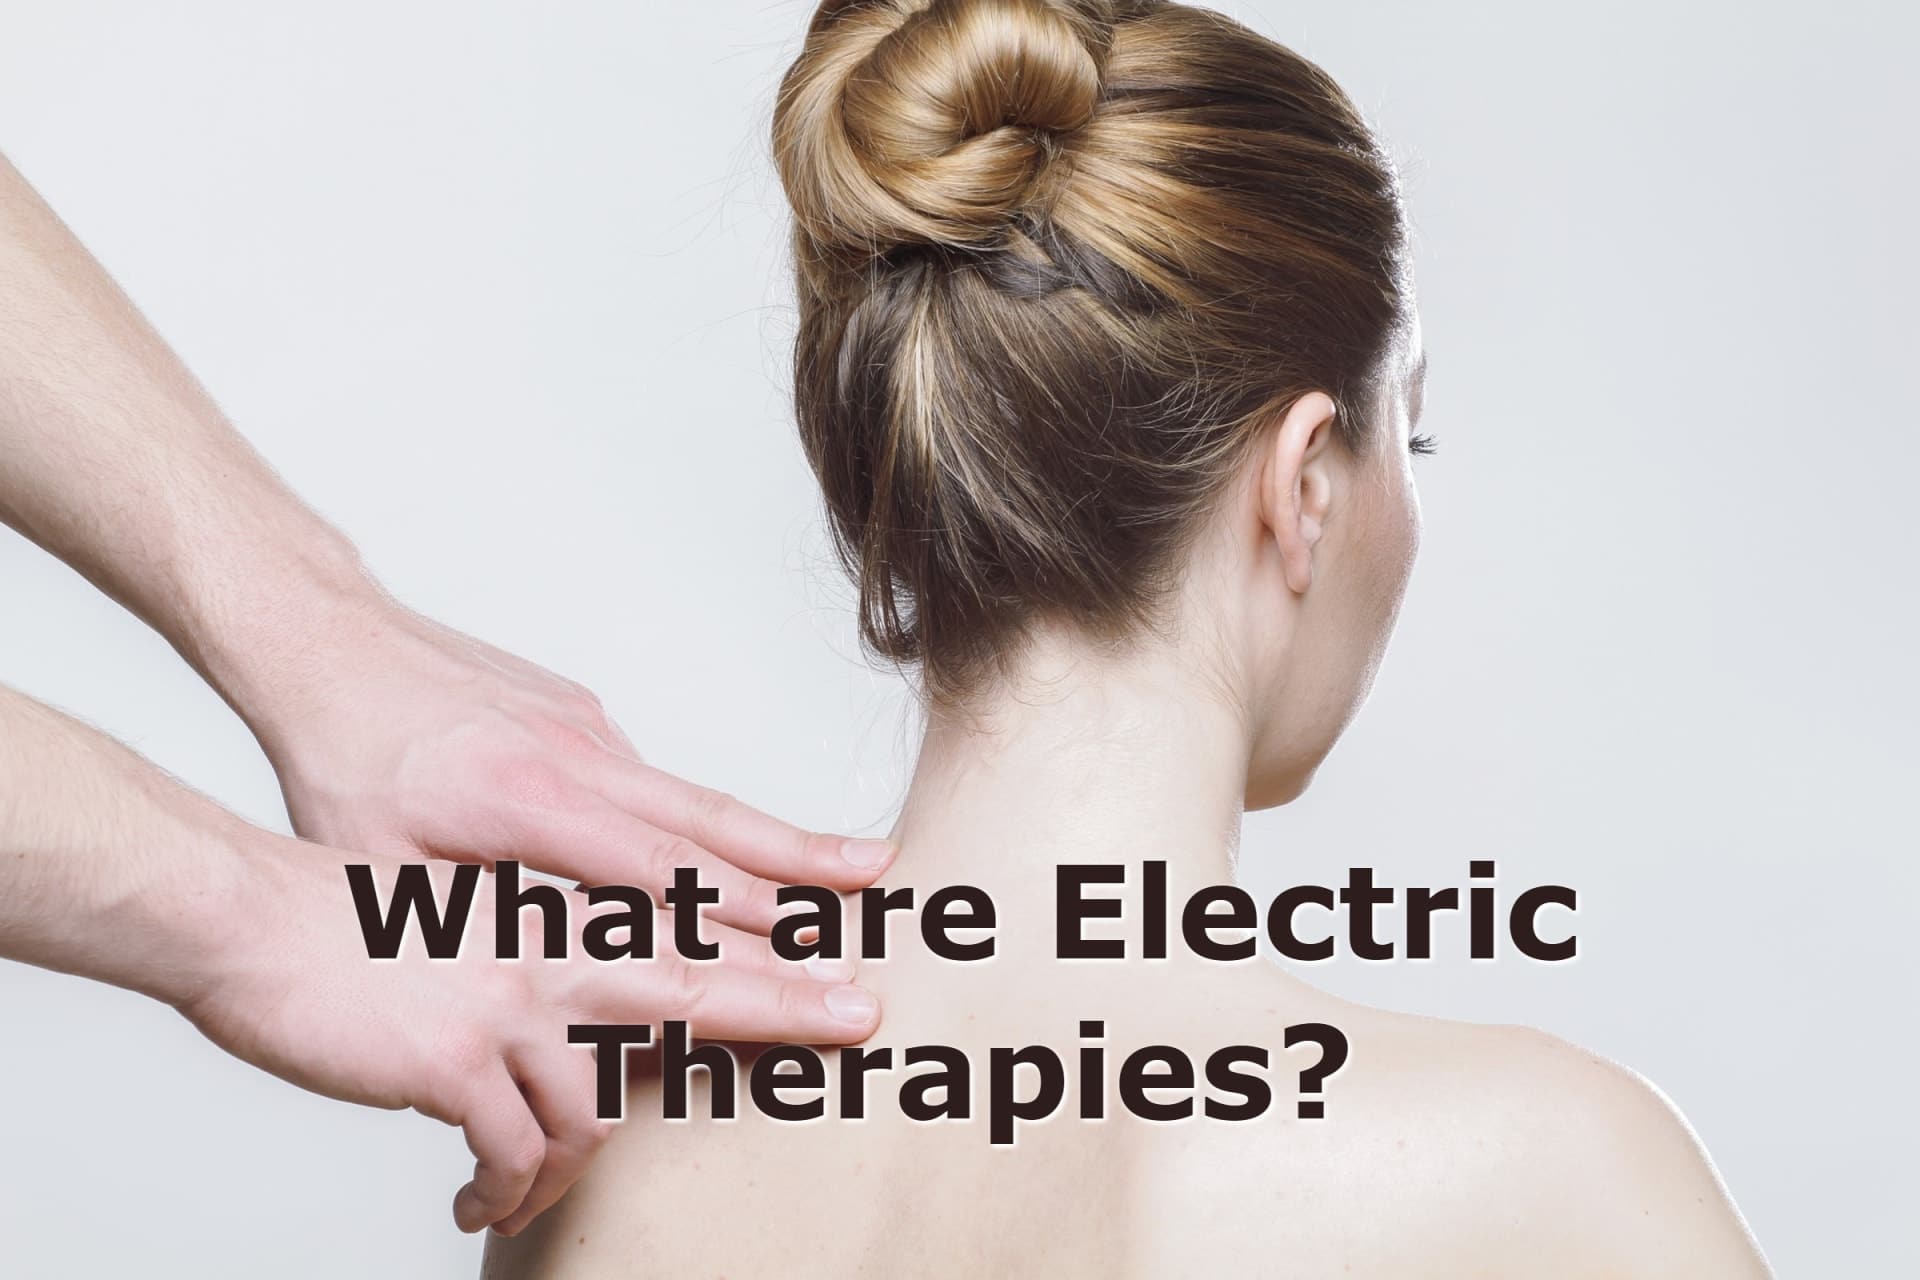 https://www.chirodenton.com/wp-content/uploads/What-are-Electric-Therapies-Integrated-Pain-Relief-A-Family-Chiropractic-Clinic.jpg